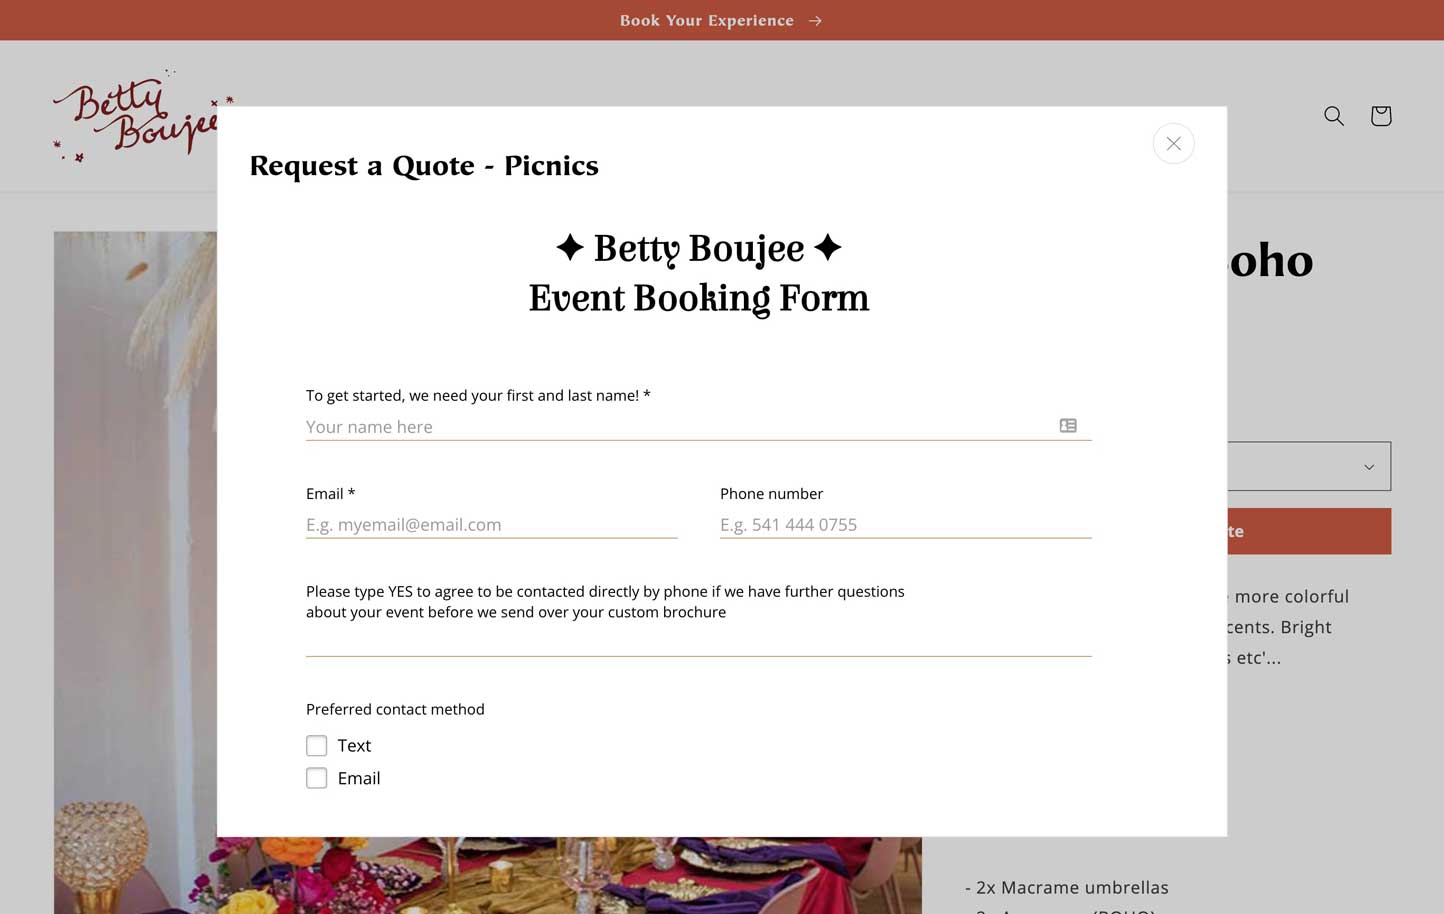 Betty Boujee Picnics - Request a Quote